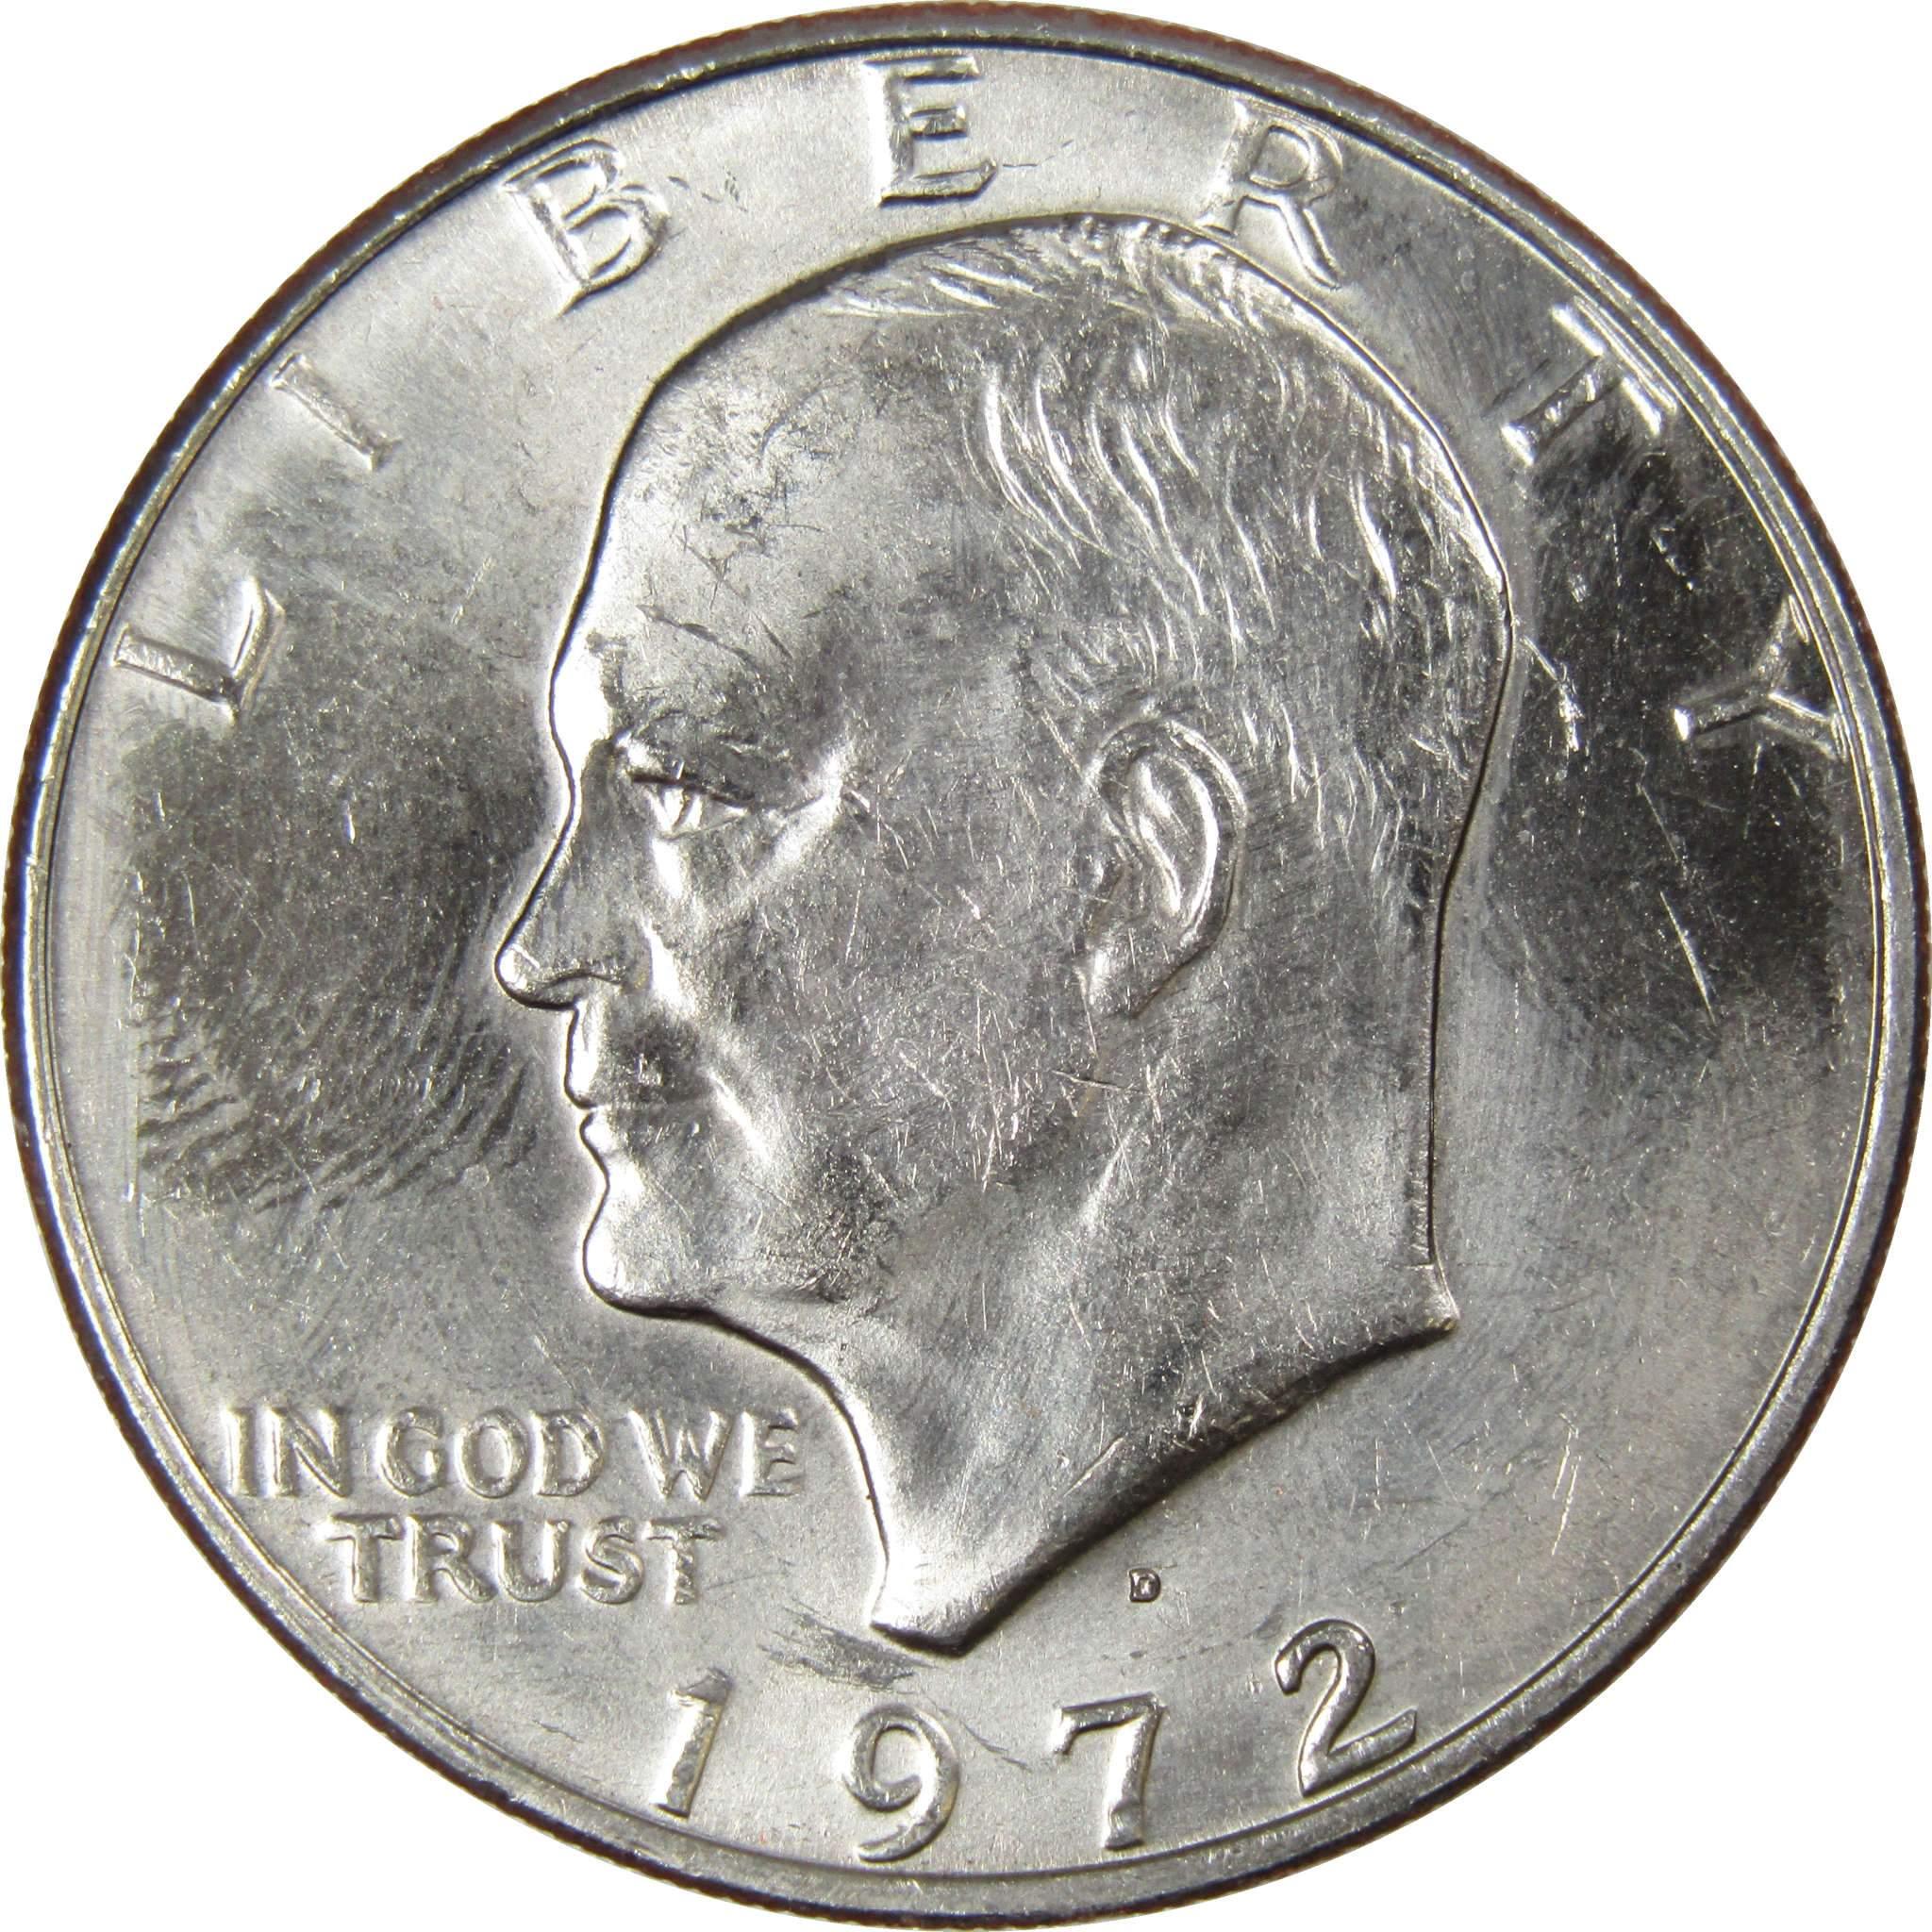 1972 D Eisenhower Dollar BU Uncirculated Mint State Clad IKE $1 US Coin